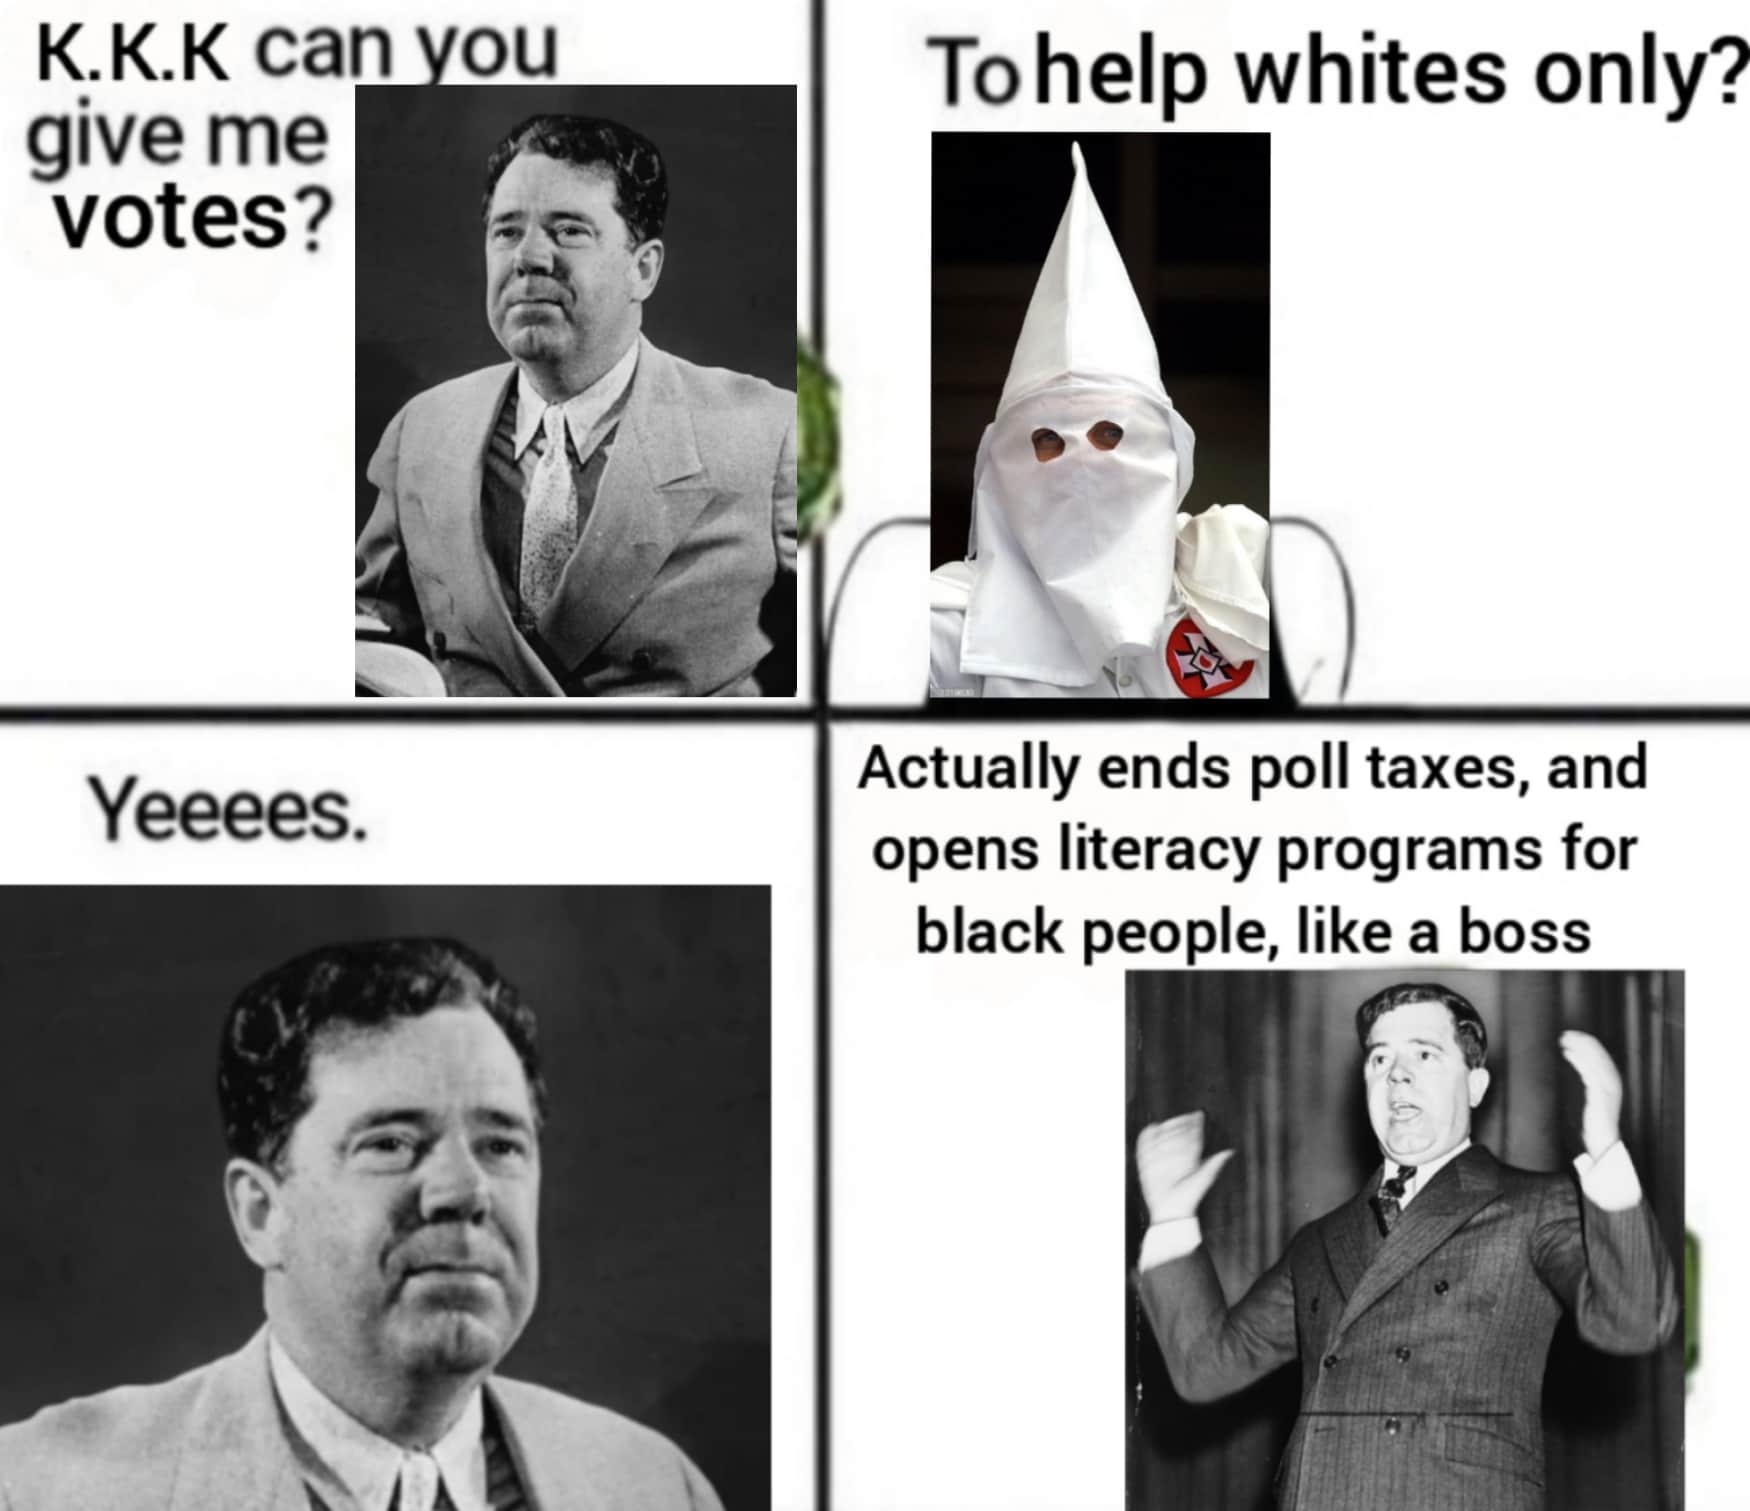 History, Huey_Long, Louisiana, Huey Long, Kingfish, Kaiserreich History Memes History, Huey_Long, Louisiana, Huey Long, Kingfish, Kaiserreich text: K.K.K can give me votes? Yeeees. ou To help whites only? Actually ends poll taxes, and opens literacy programs for black people, like a boss 